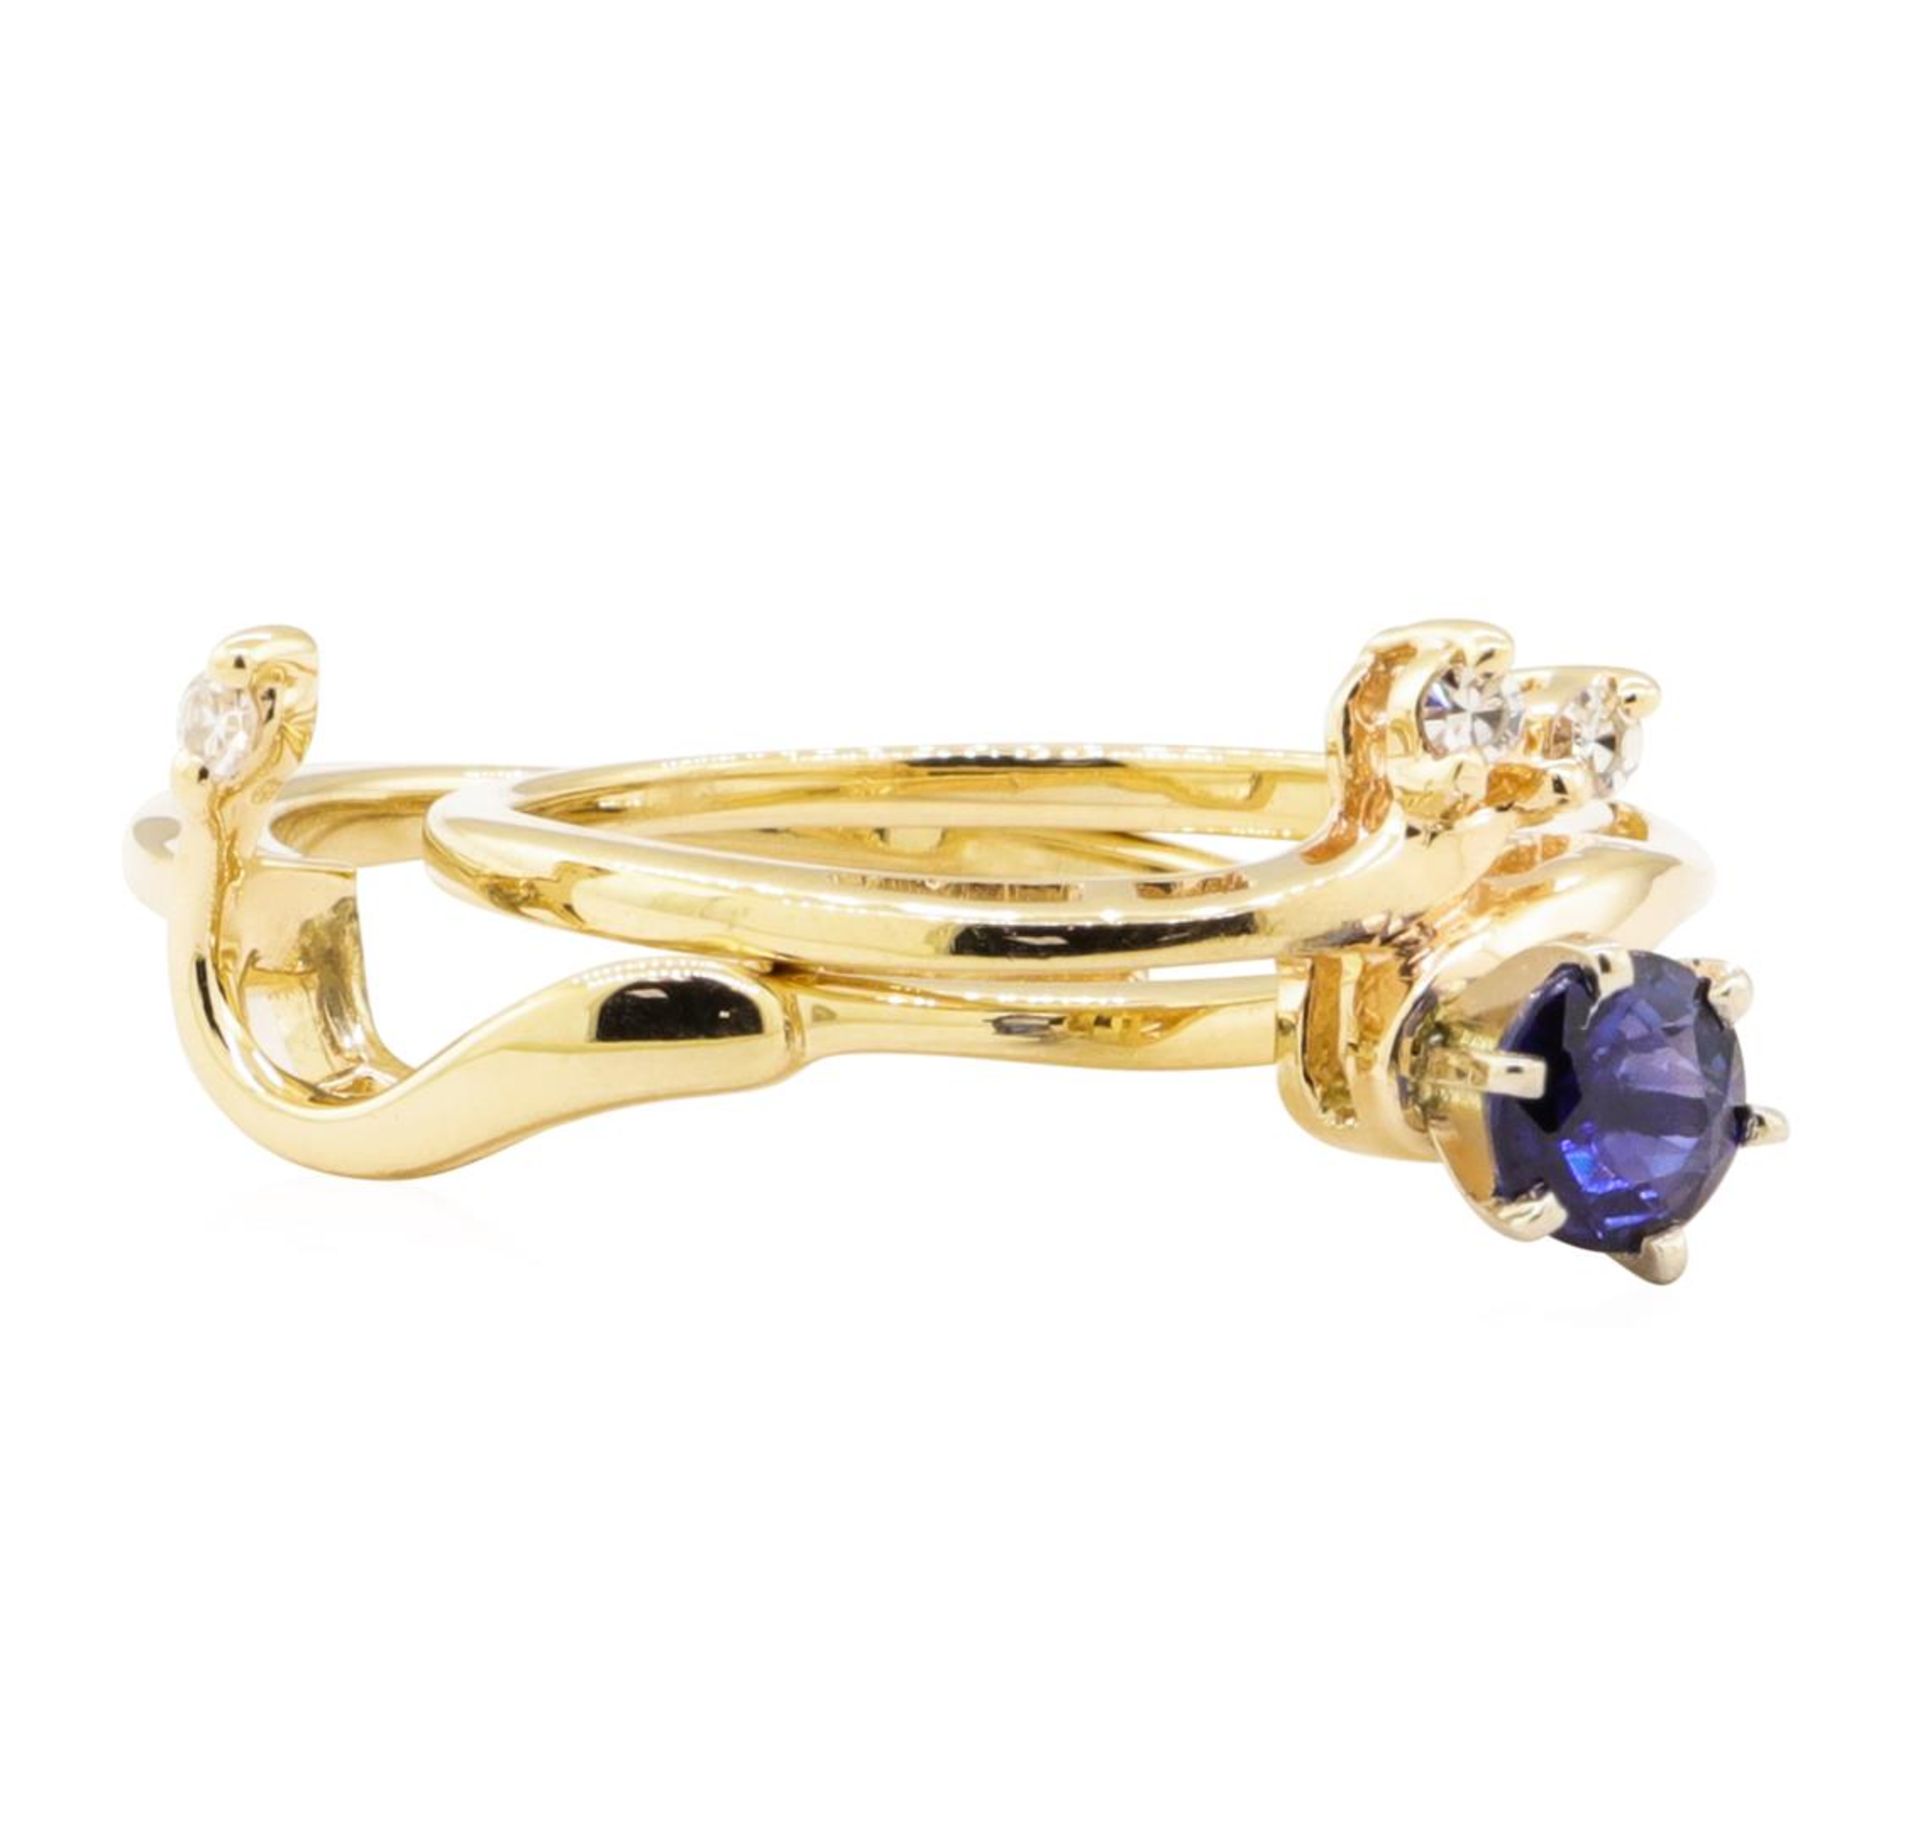 0.67 ctw Blue Sapphire and Diamond Ring - 14KT Yellow Gold - Image 3 of 3